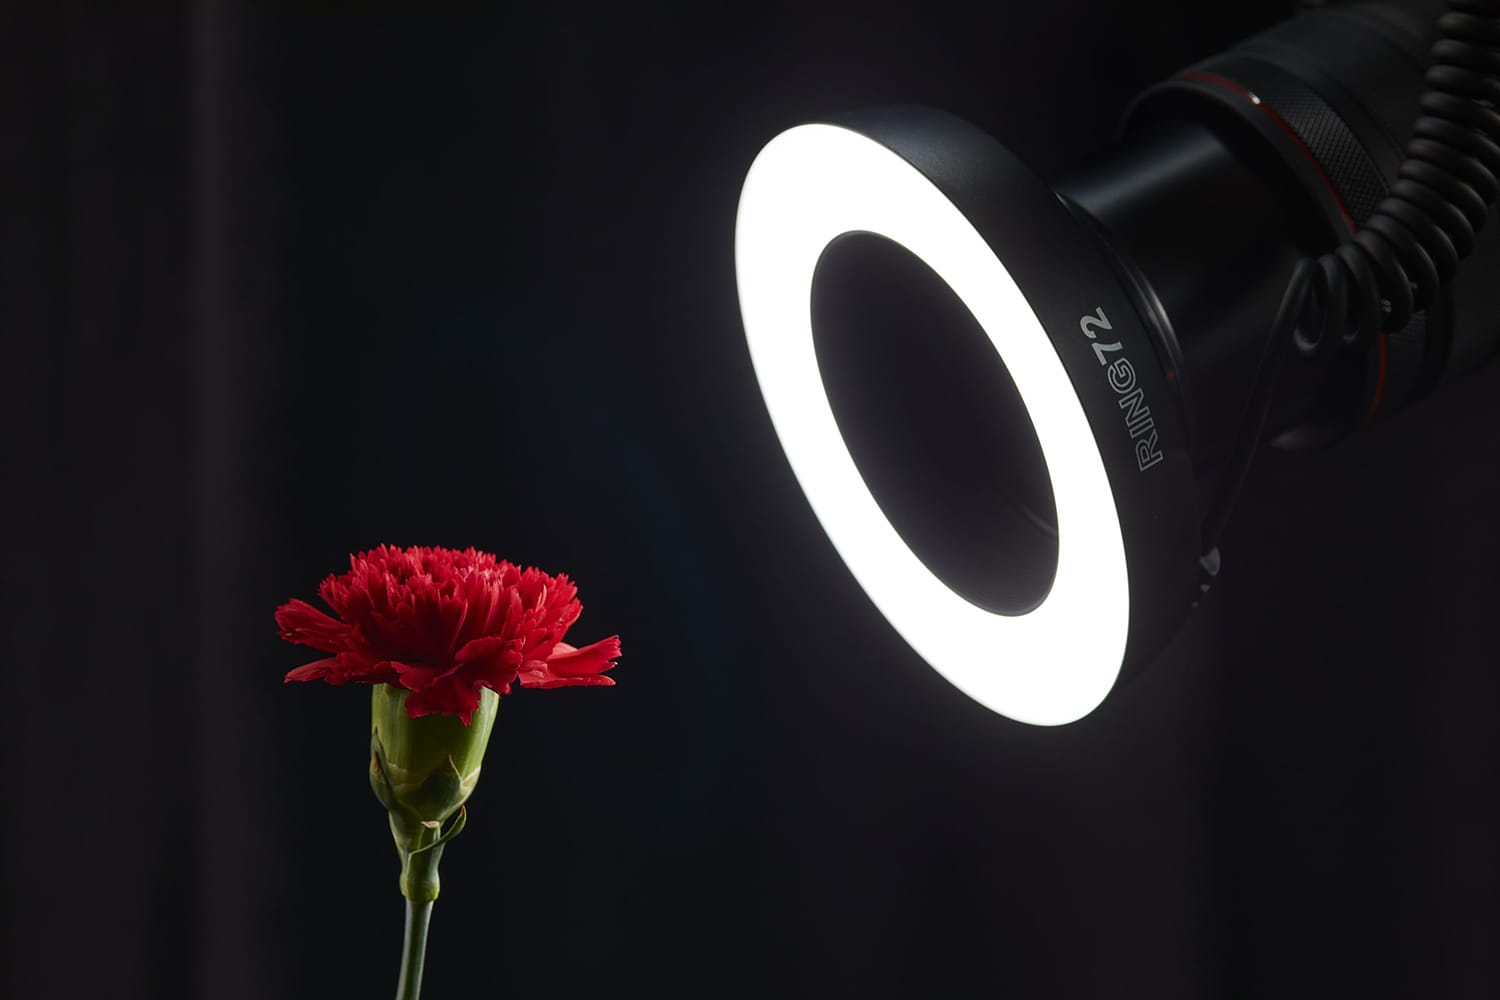 Overview of the Godox RING72 Macro LED Ring Light